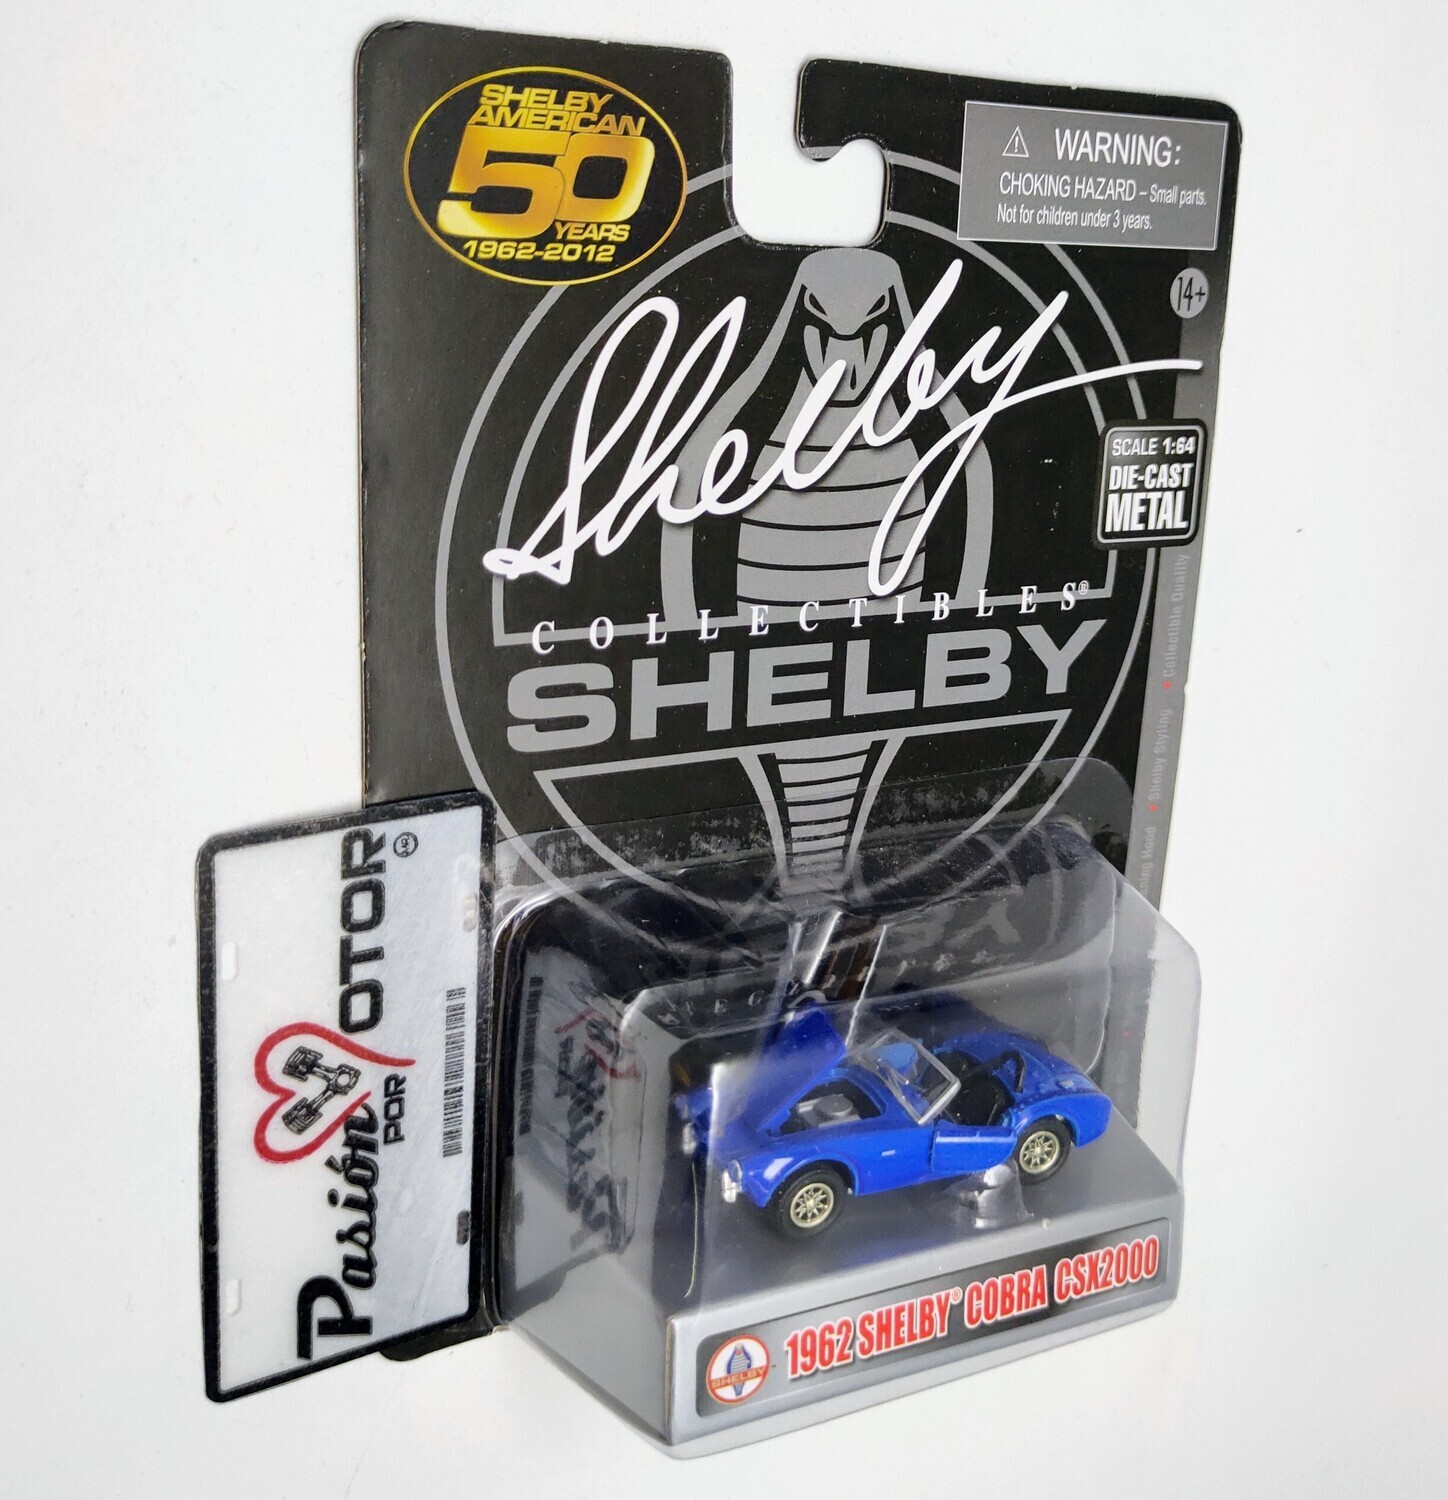 1:64 Shelby Cobra Roadster 1962 - 1964- 1965 Shelby Collectibles Cars